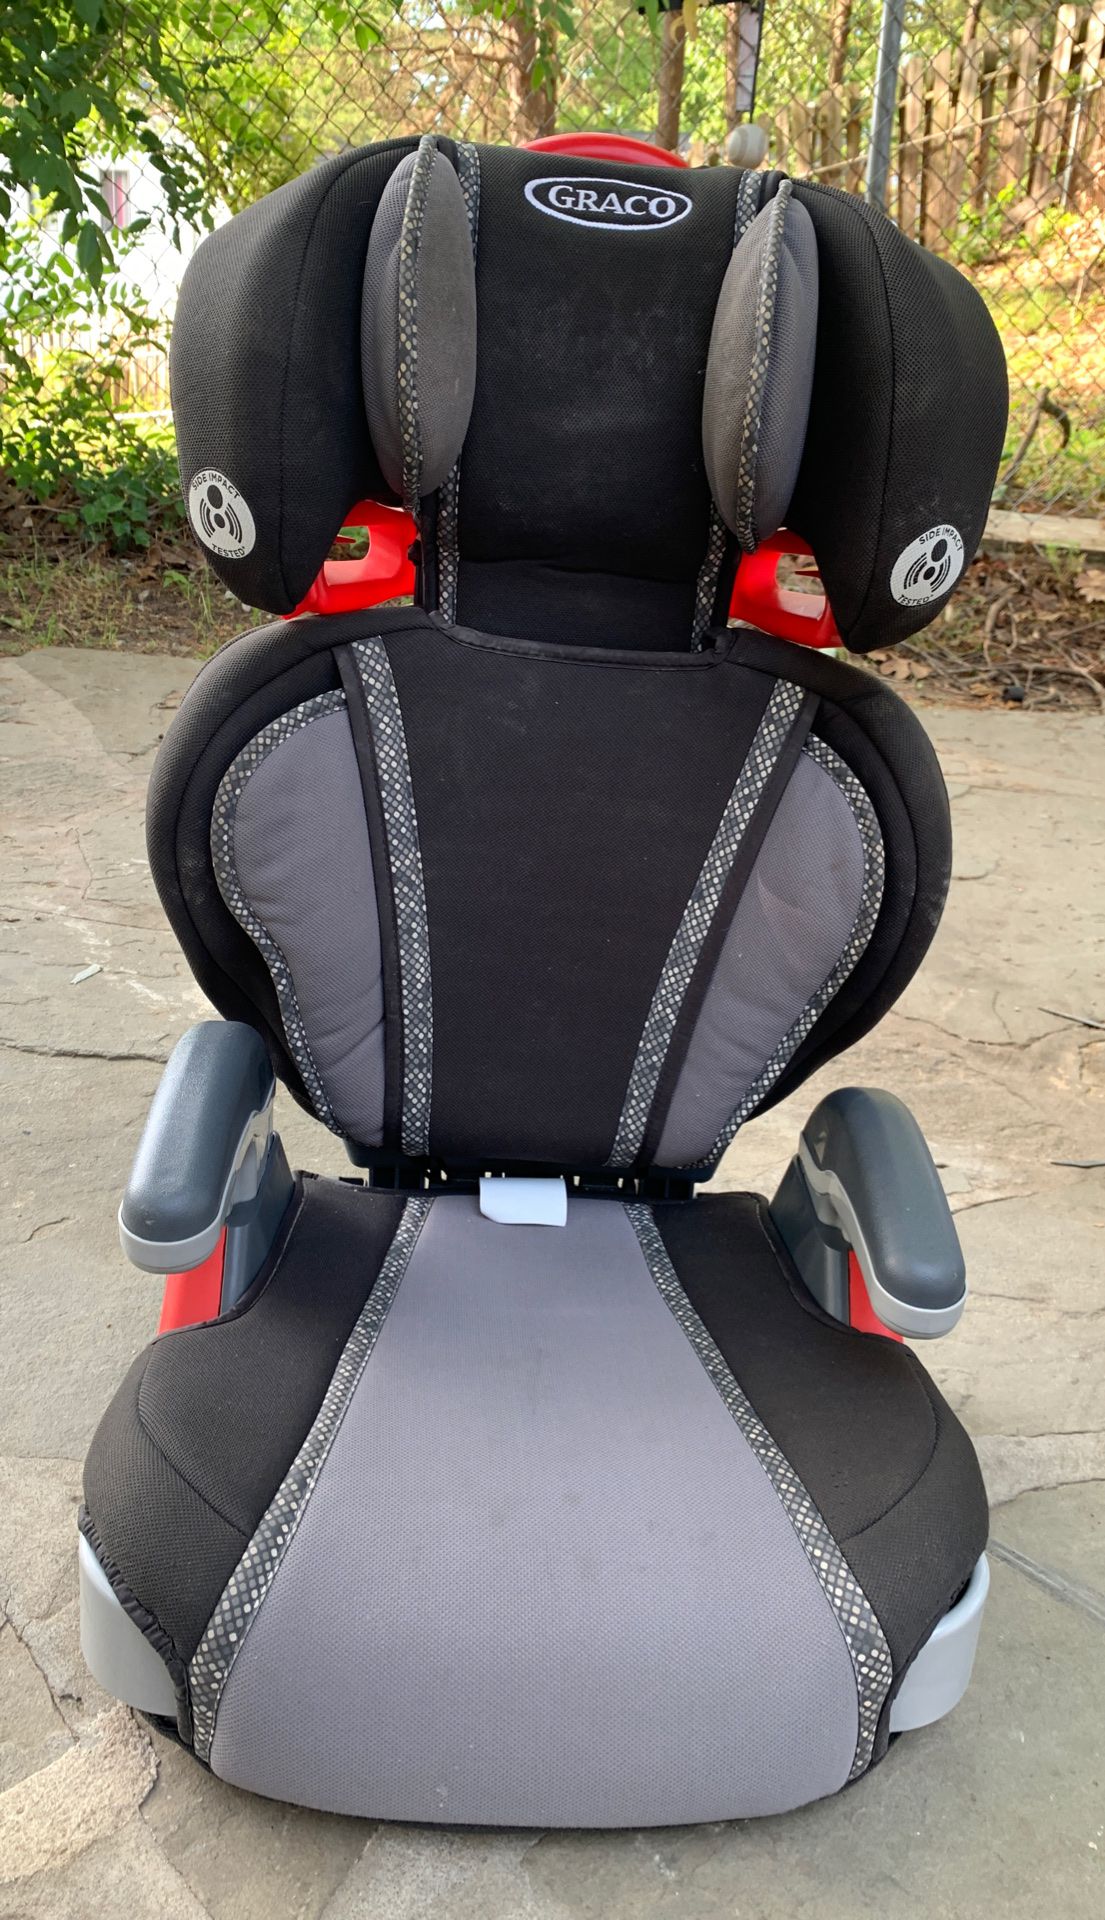 Booster seat Graco